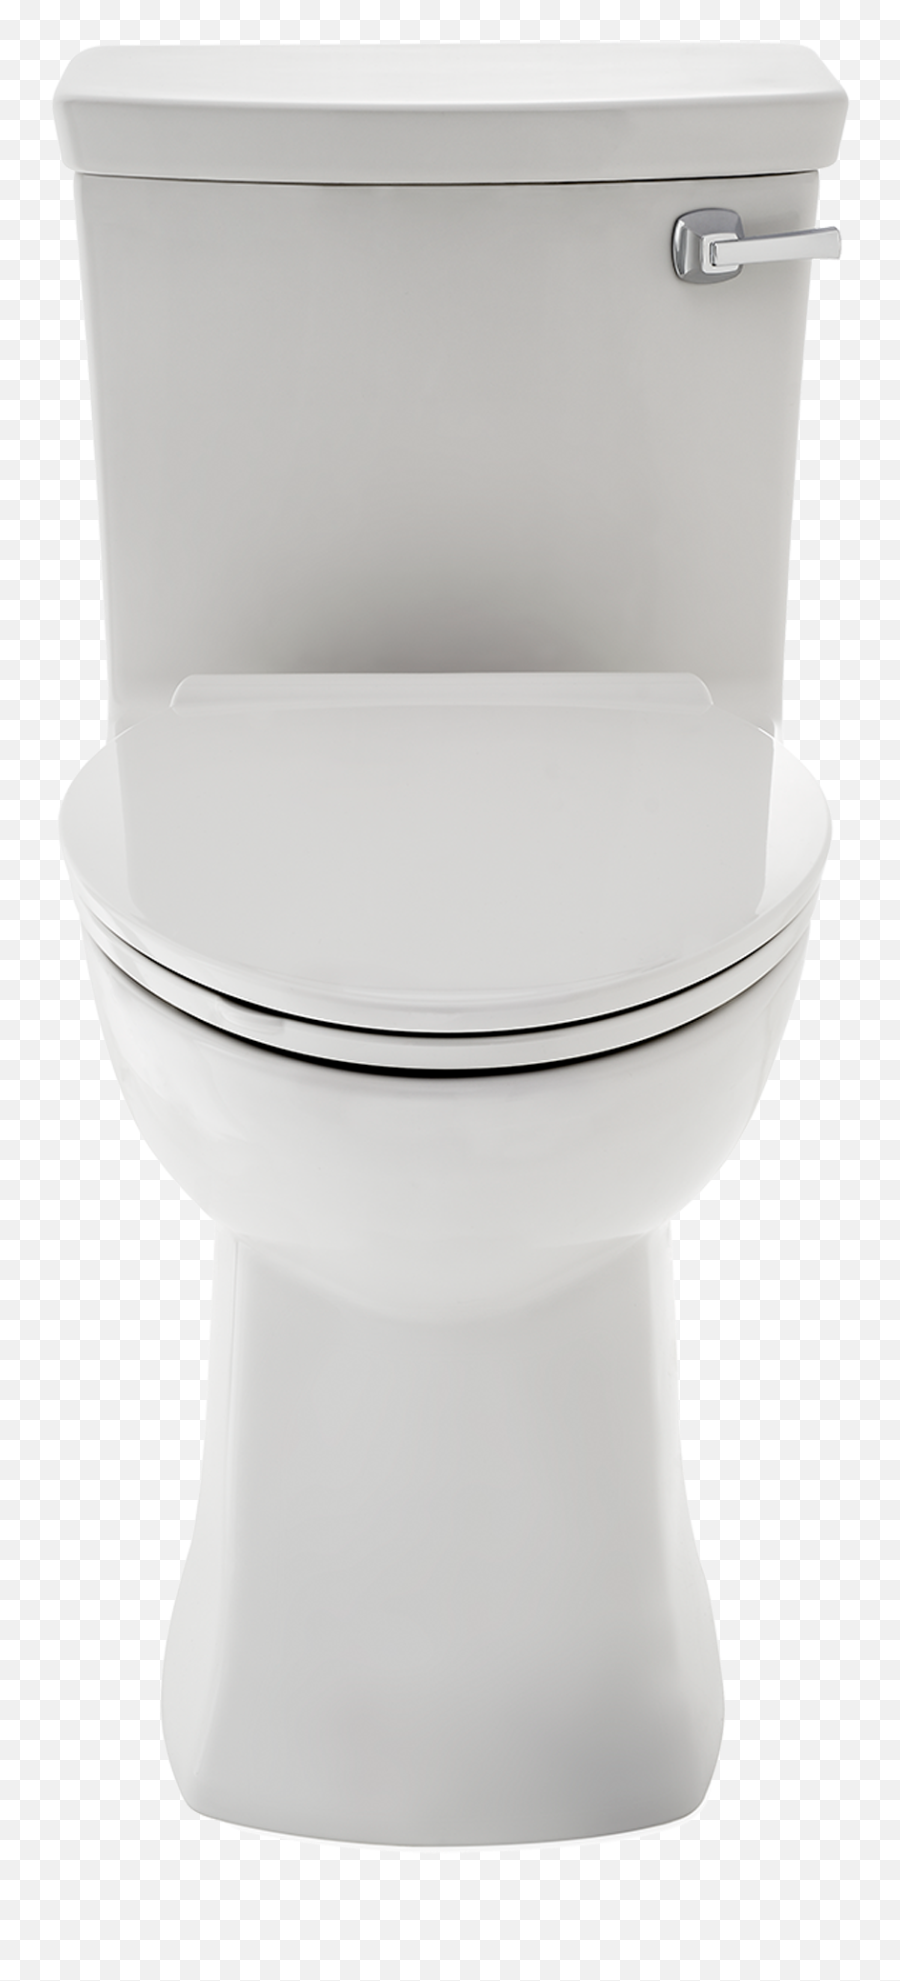 Toilet Png 3 Image - American Standard 2922a Townsend Vormax Elongated Toilet,Toilet Png